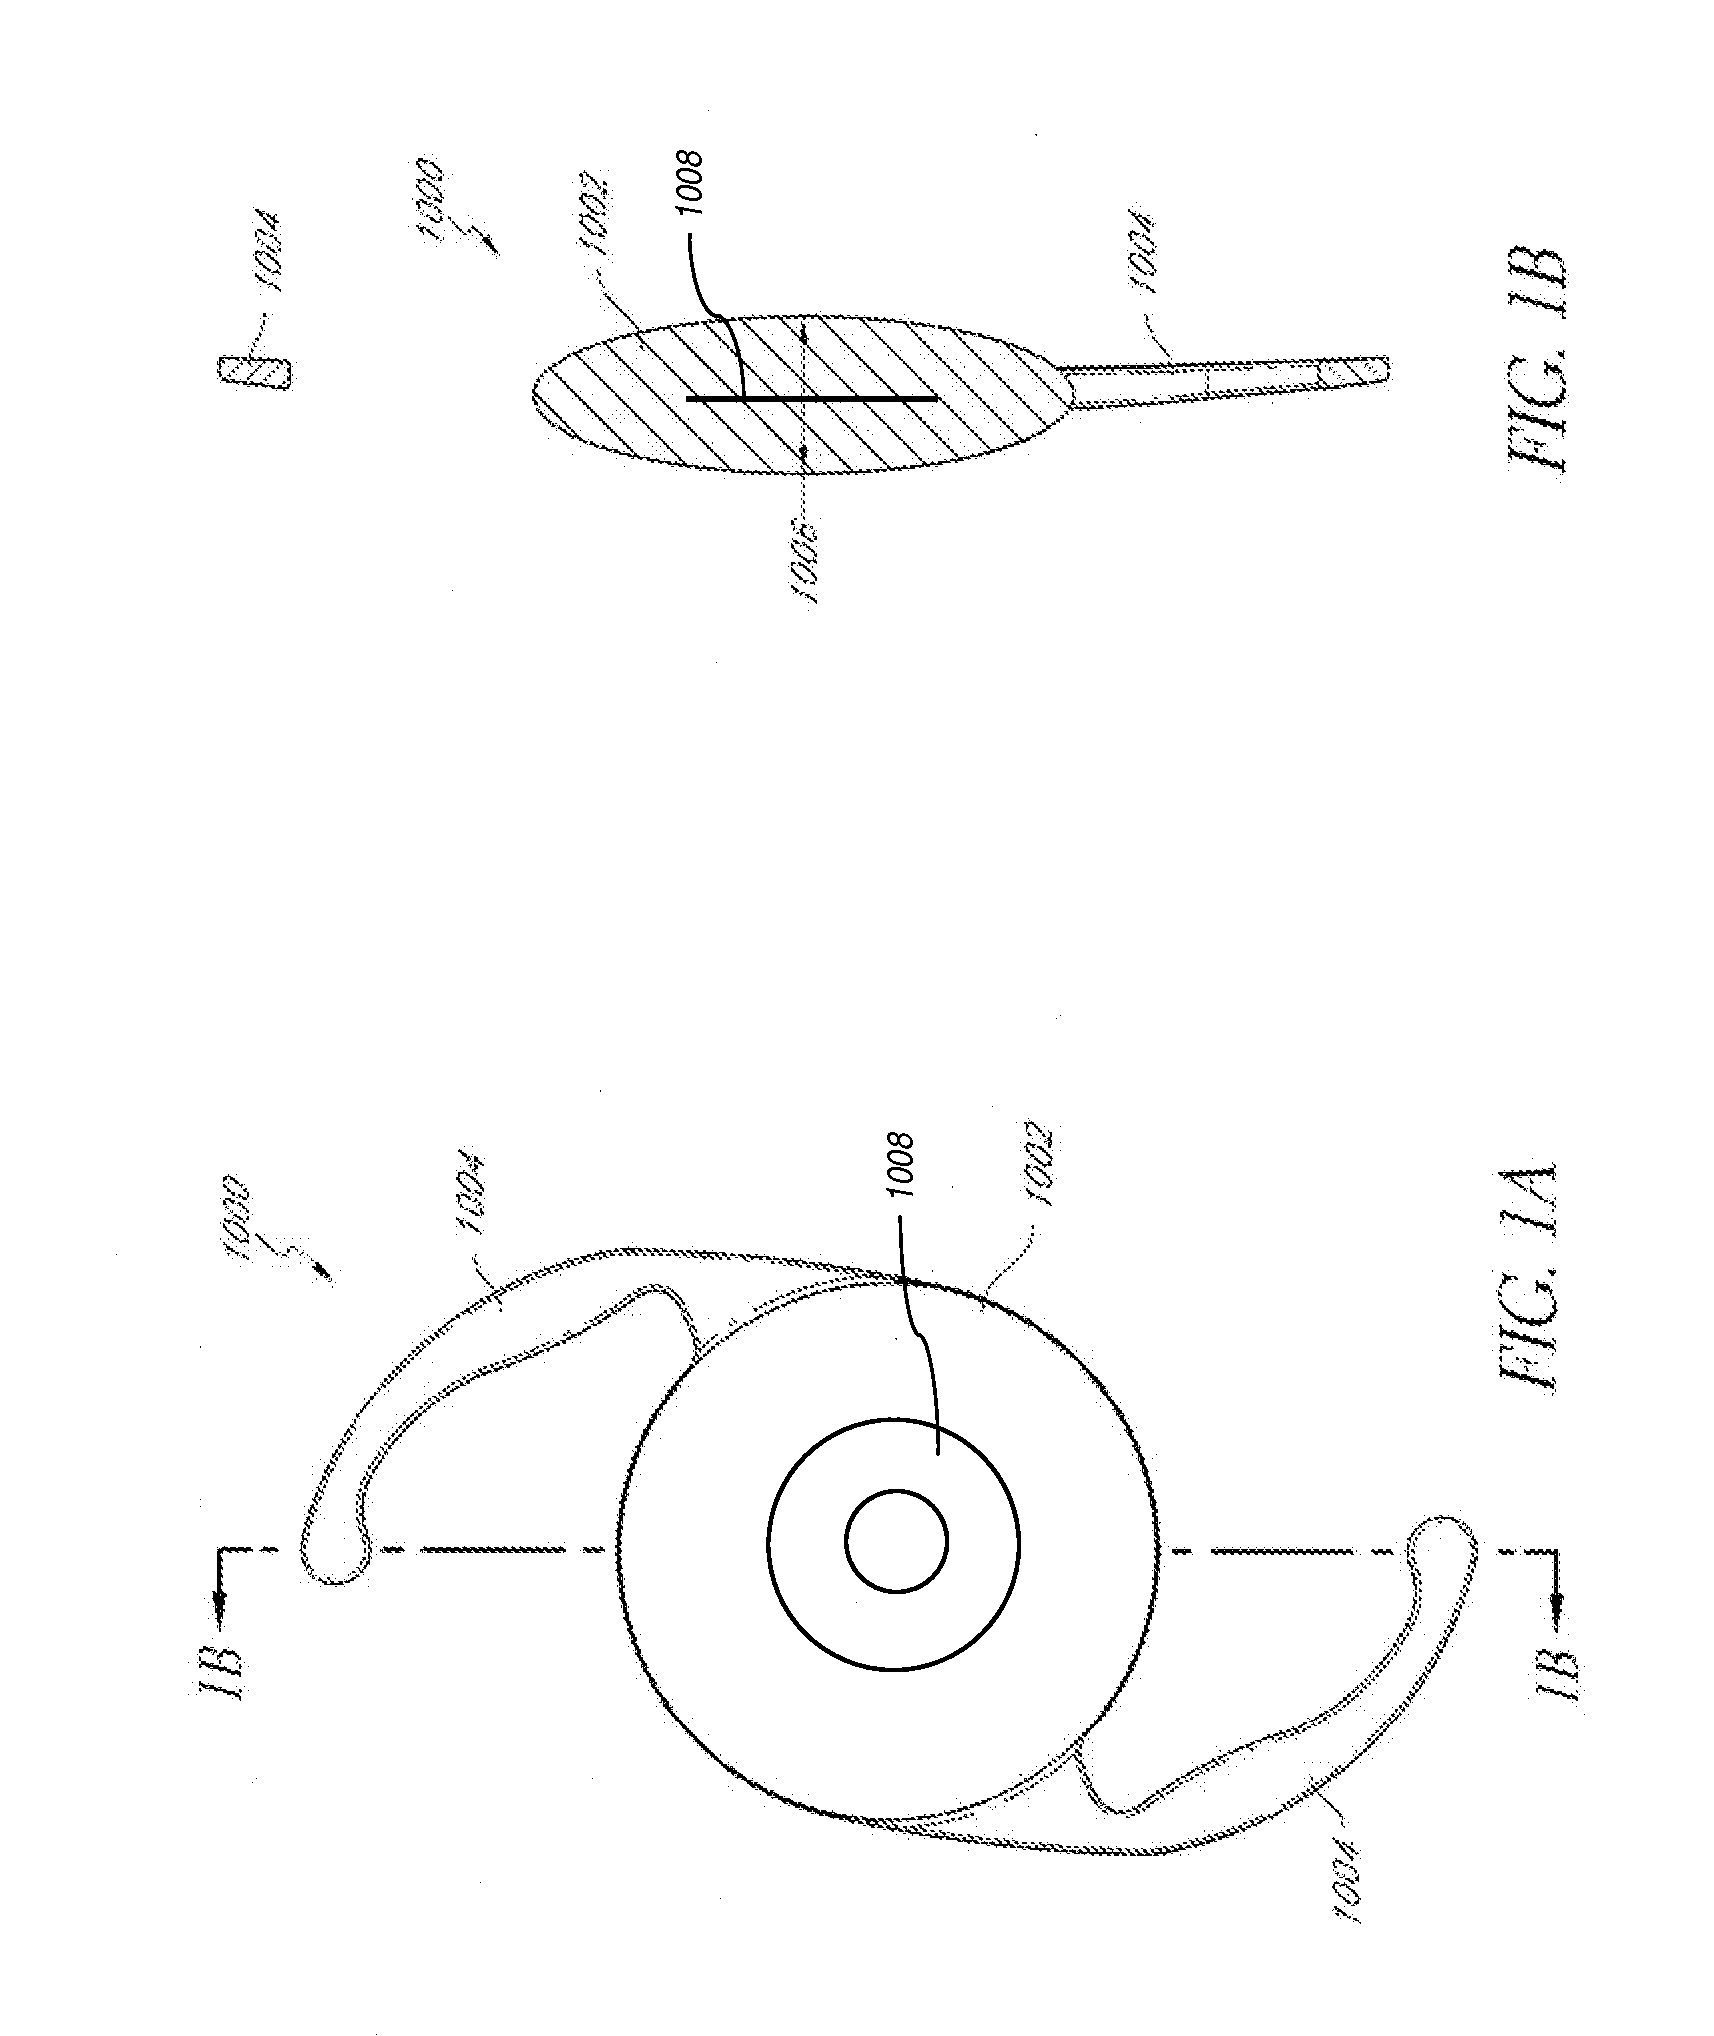 Intraocular lens with elastic mask